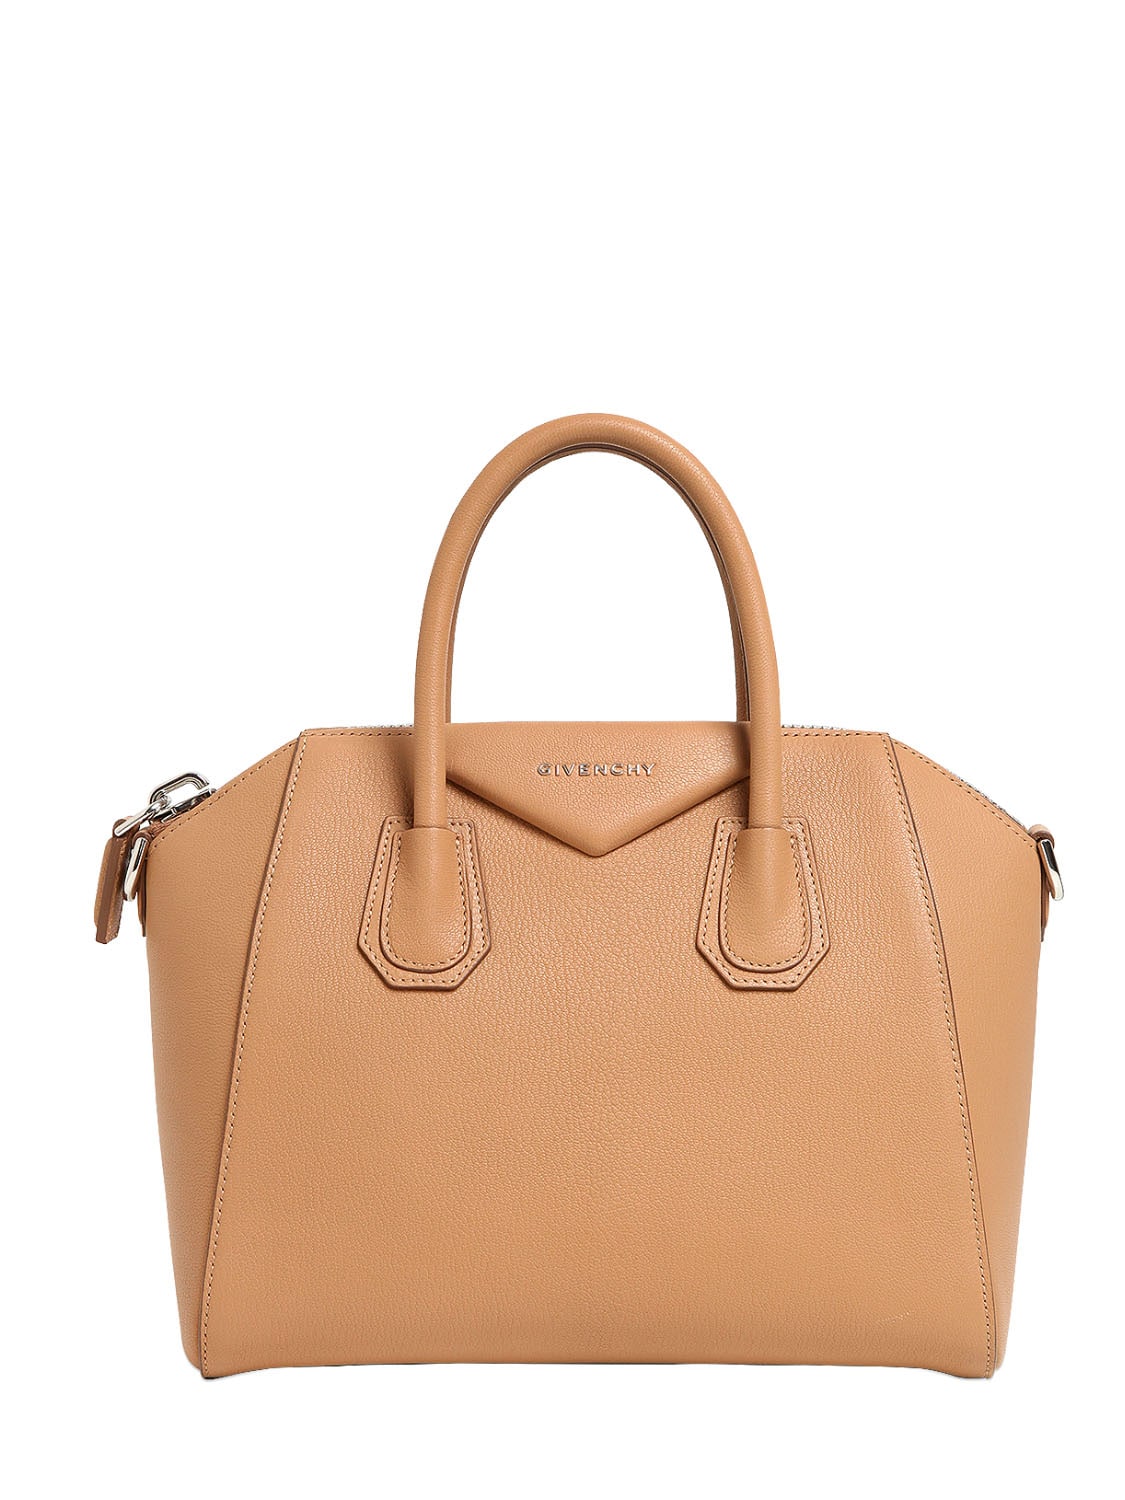 Givenchy Small Antigona Grained Leather Bag In Camel